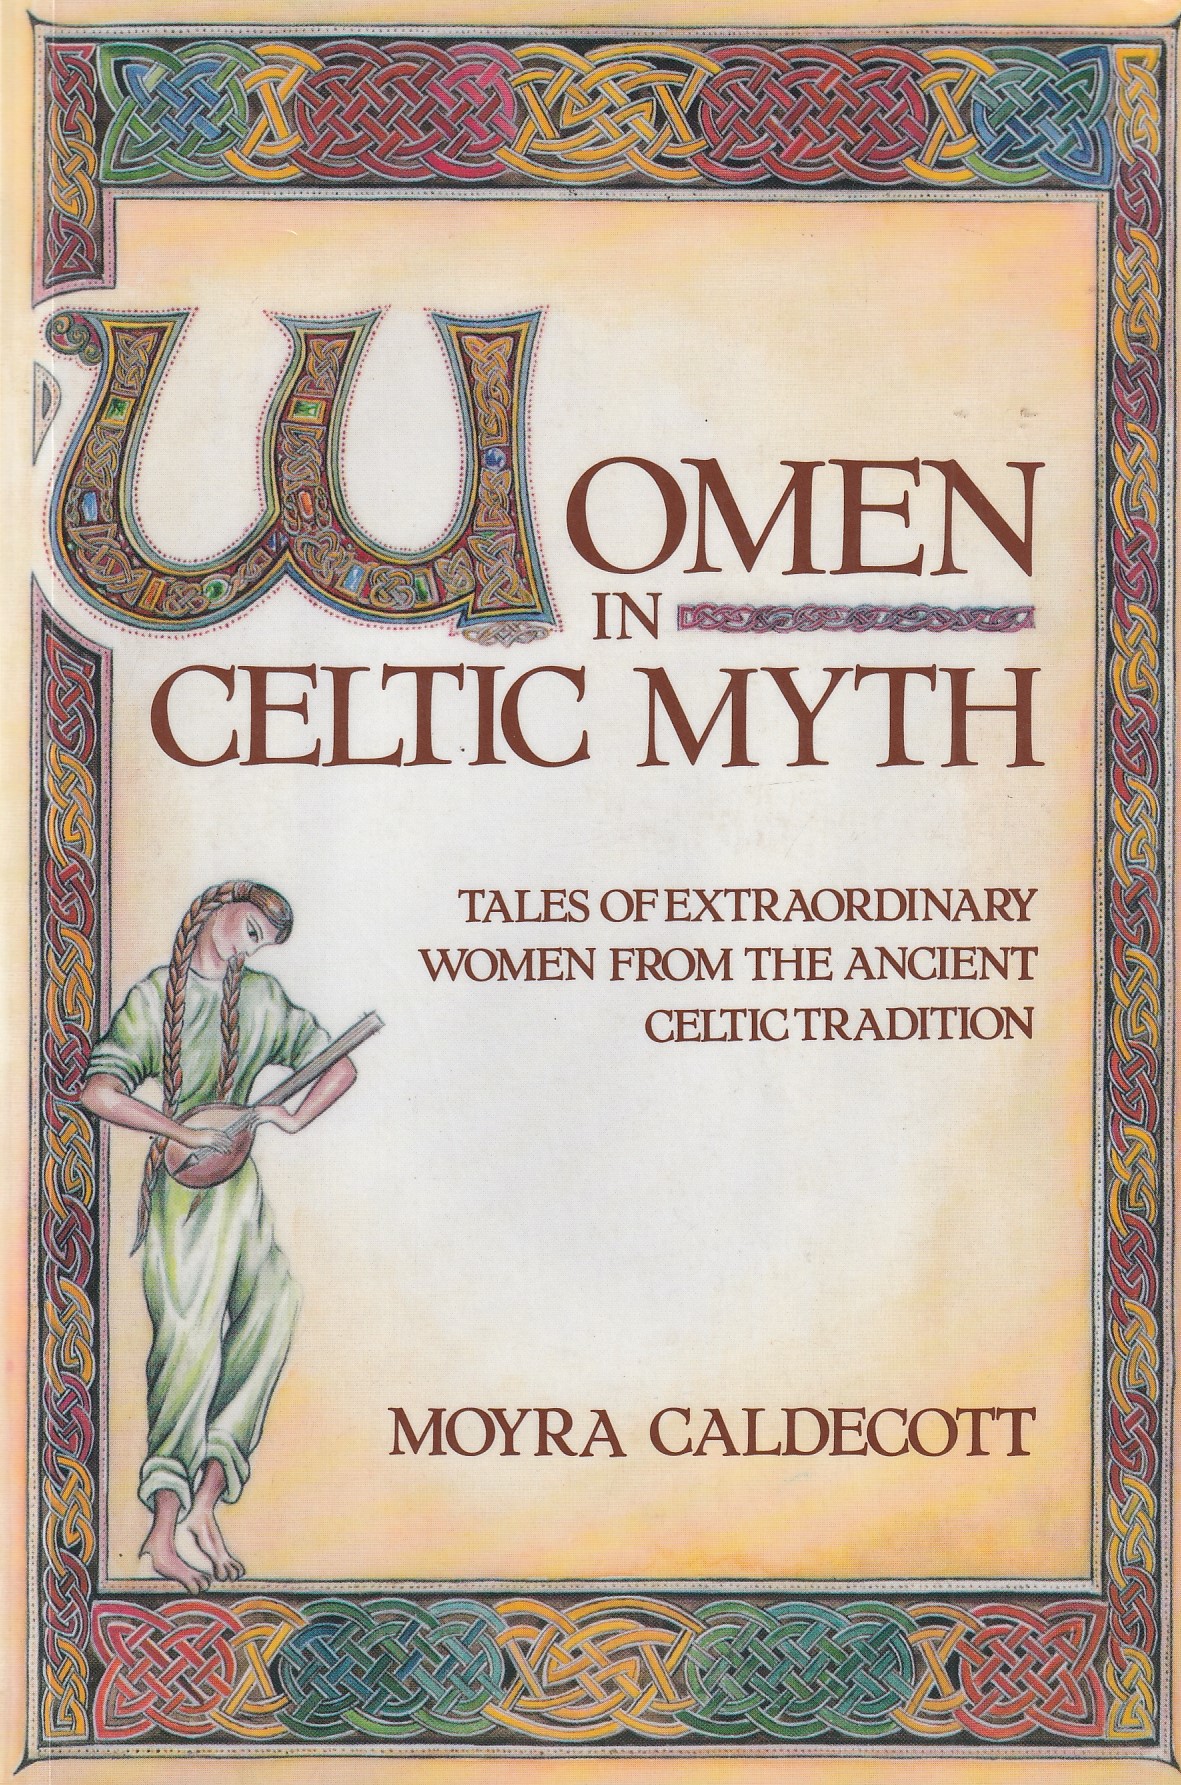 Women in Celtic Myth: Tales of Extraordinary Women from the Ancient Celtic Tradition | Caldecott, Moyra | Charlie Byrne's